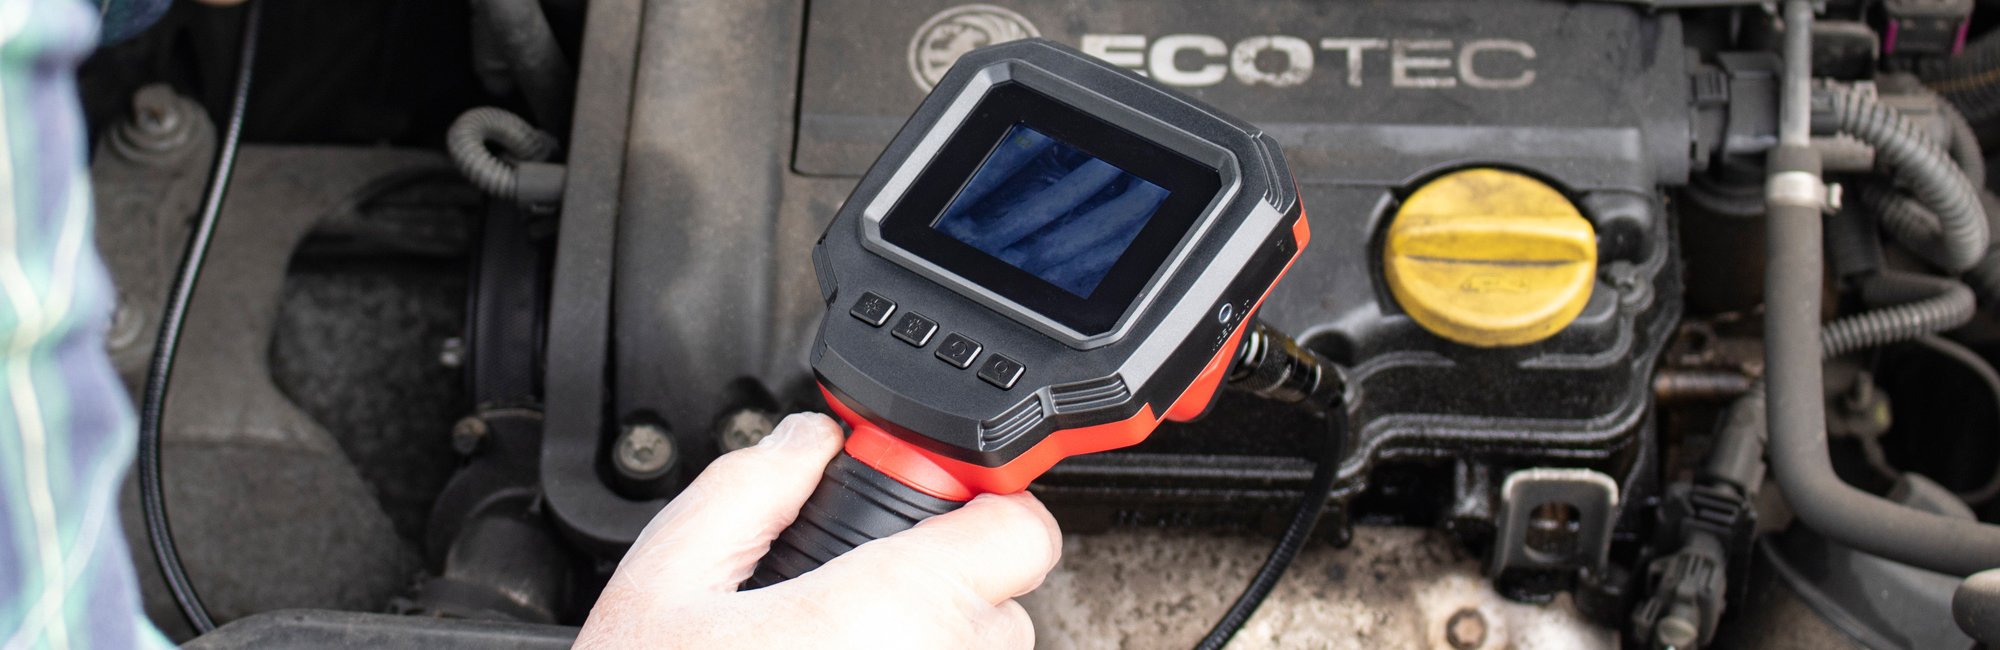 Image Top Inspection camera